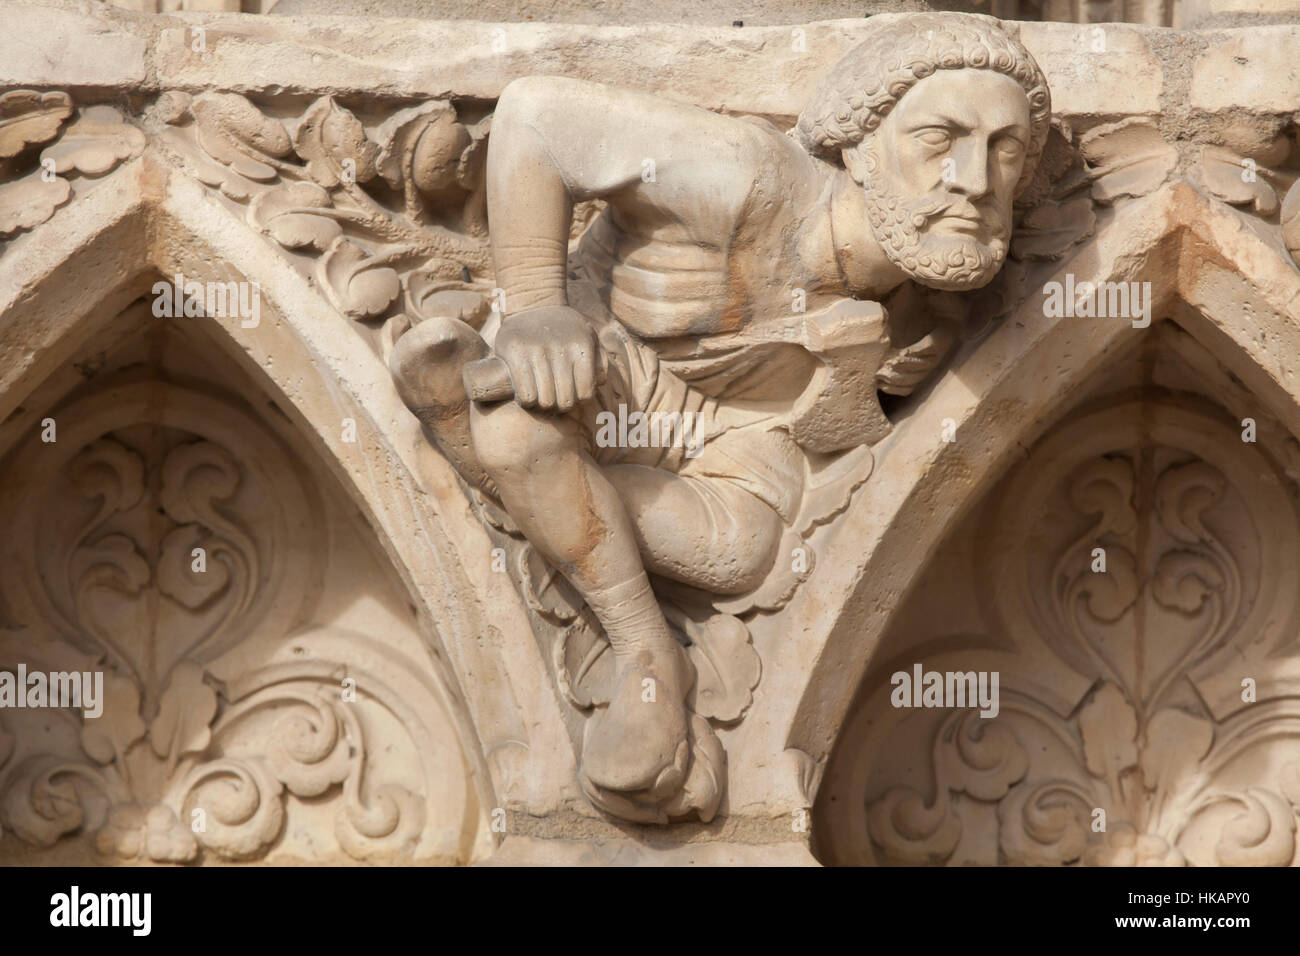 Man with an axe. Neo-Gothic statue on the main facade of the Notre-Dame Cathedral (Notre-Dame de Paris) in Paris, France. The damaged Gothic portal was restored by French architects Eugene Viollet-le-Duc and Jean-Baptiste Lassus in the 1840s. Stock Photo